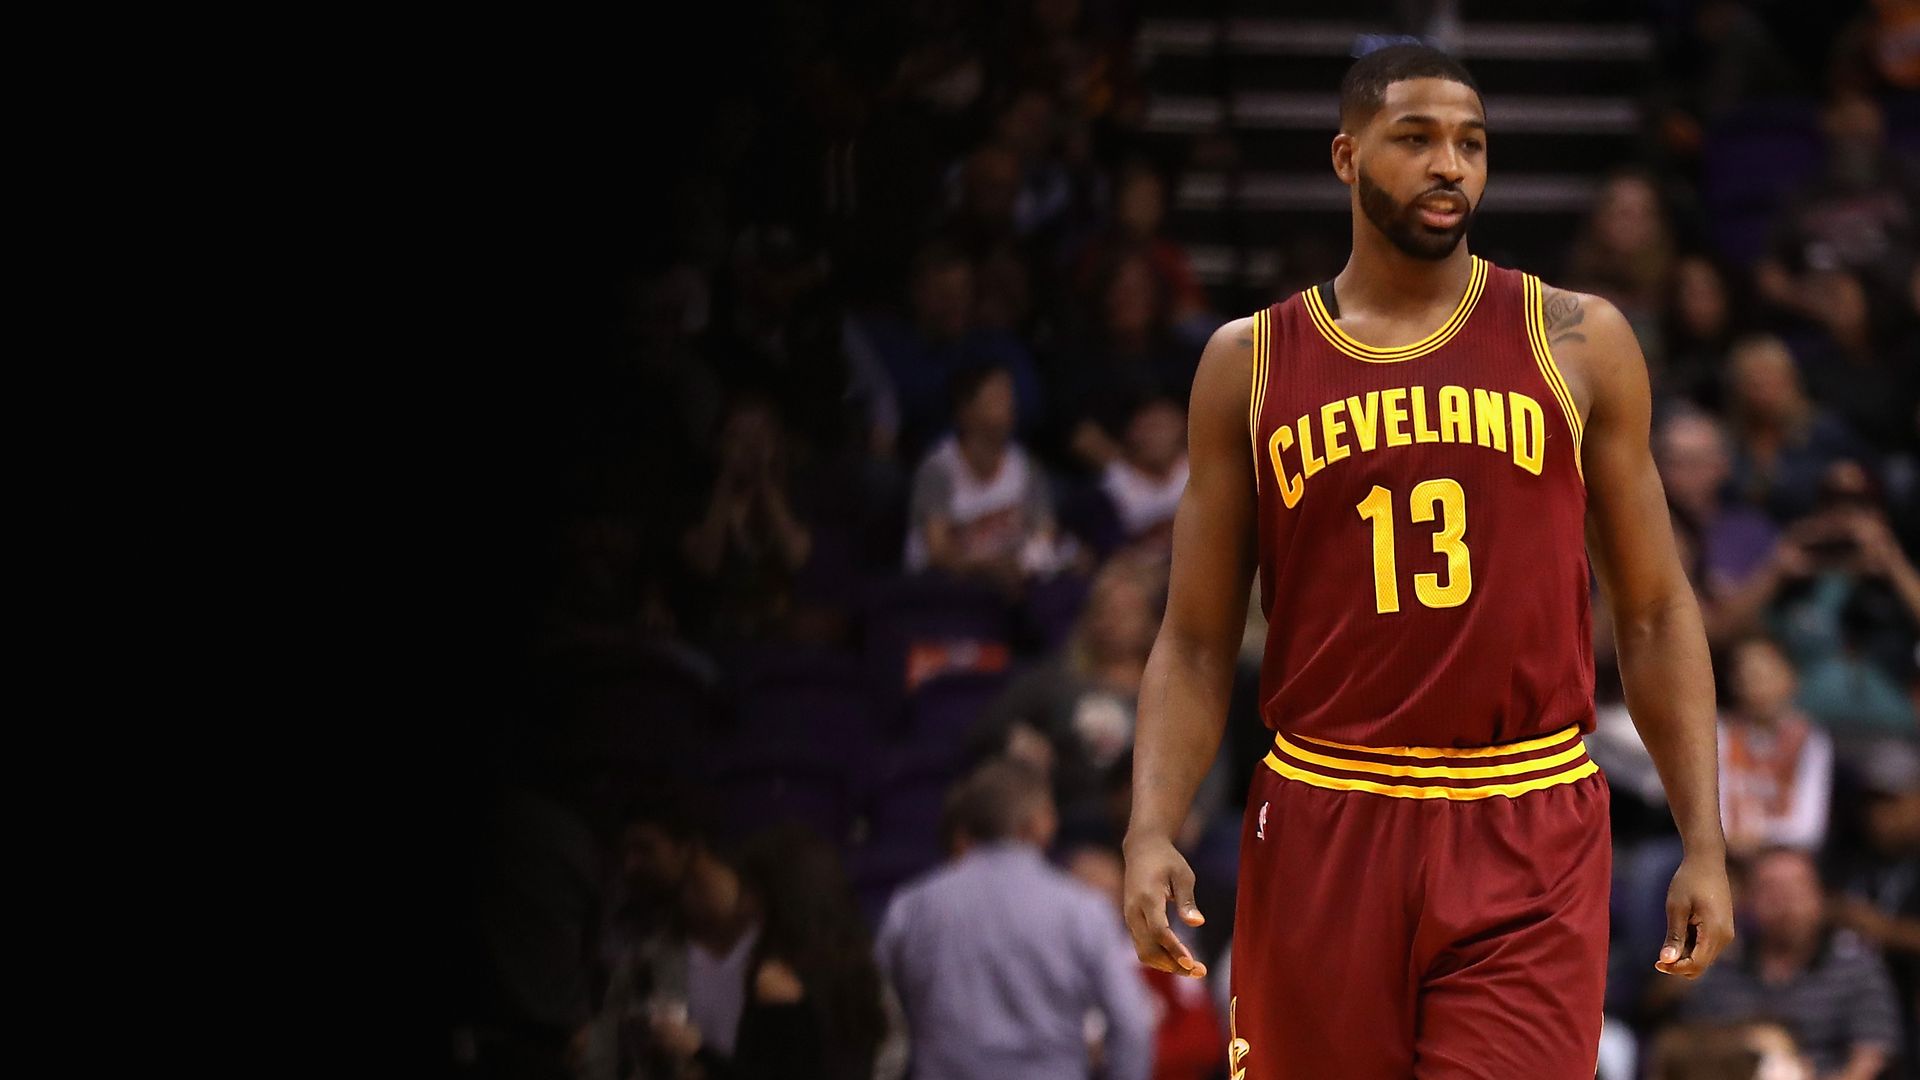 The Cavs' Tristan Thompson, in wine-colored uniform, during a game in 2017